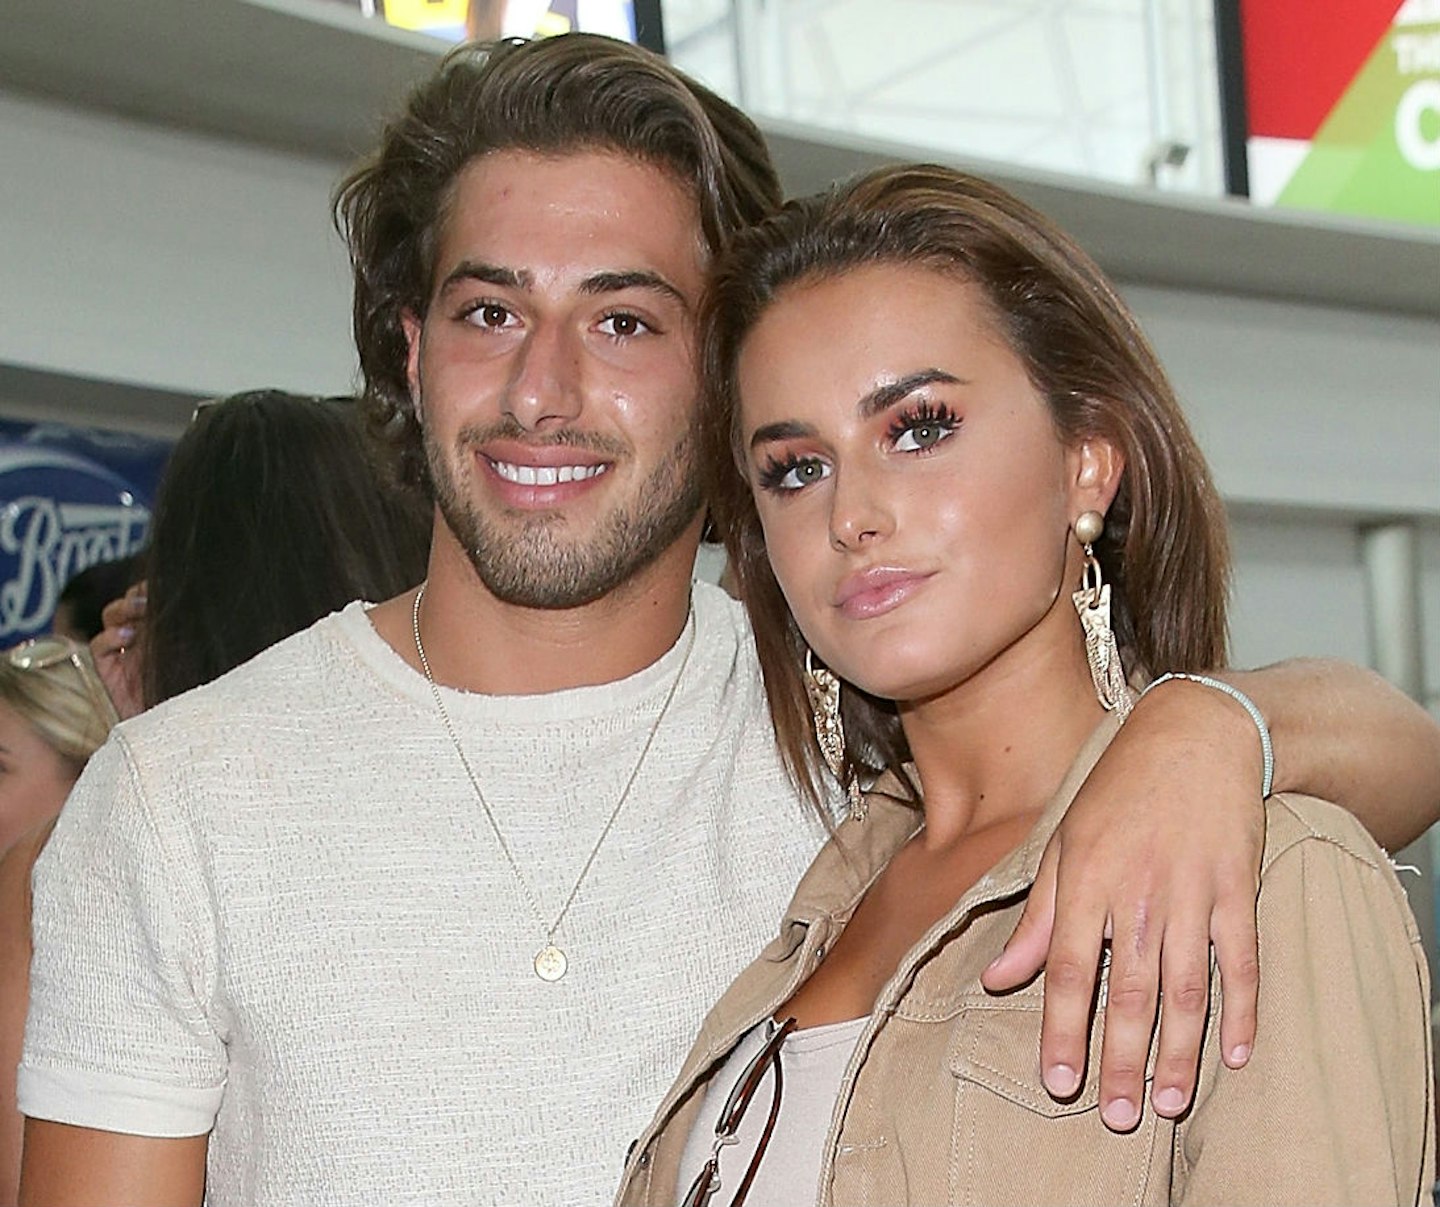 Love Island Amber Davies And Kem Cetinay Win Presenting Jobs As Naked Picture Of Hunk Surfaces